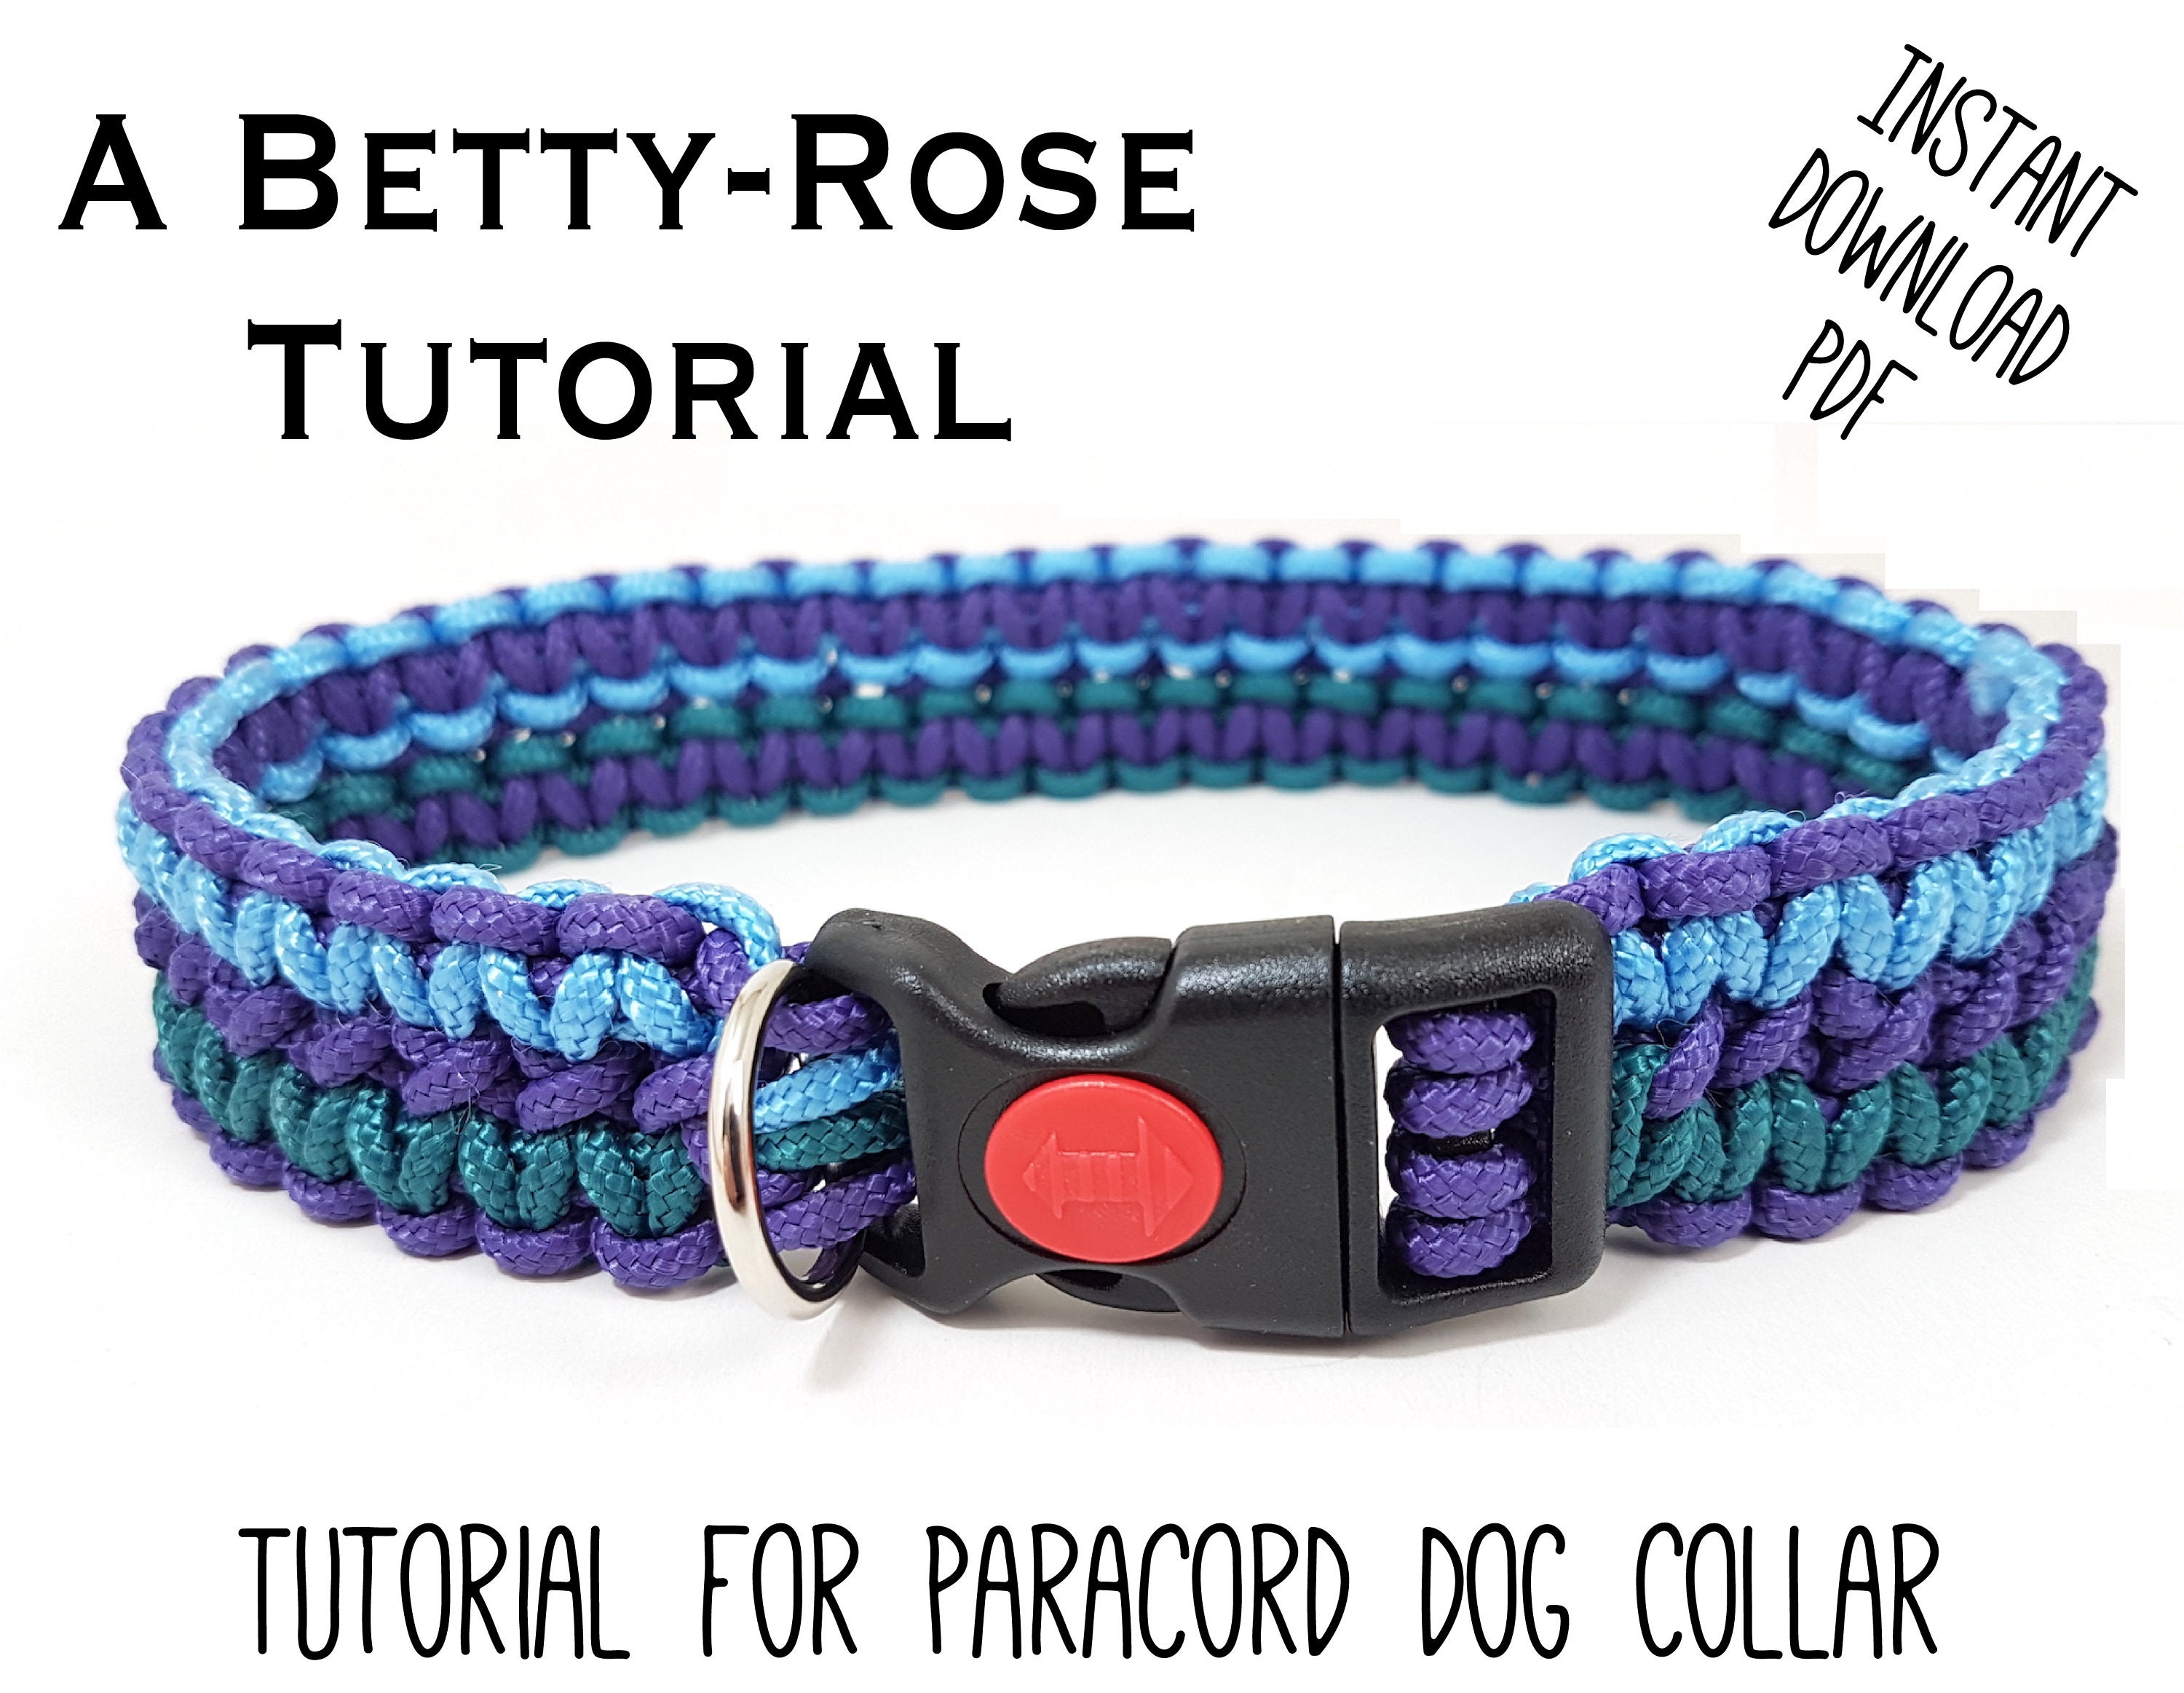 Tutorial for Paracord Dog Collar - Instant Download PDF Pattern